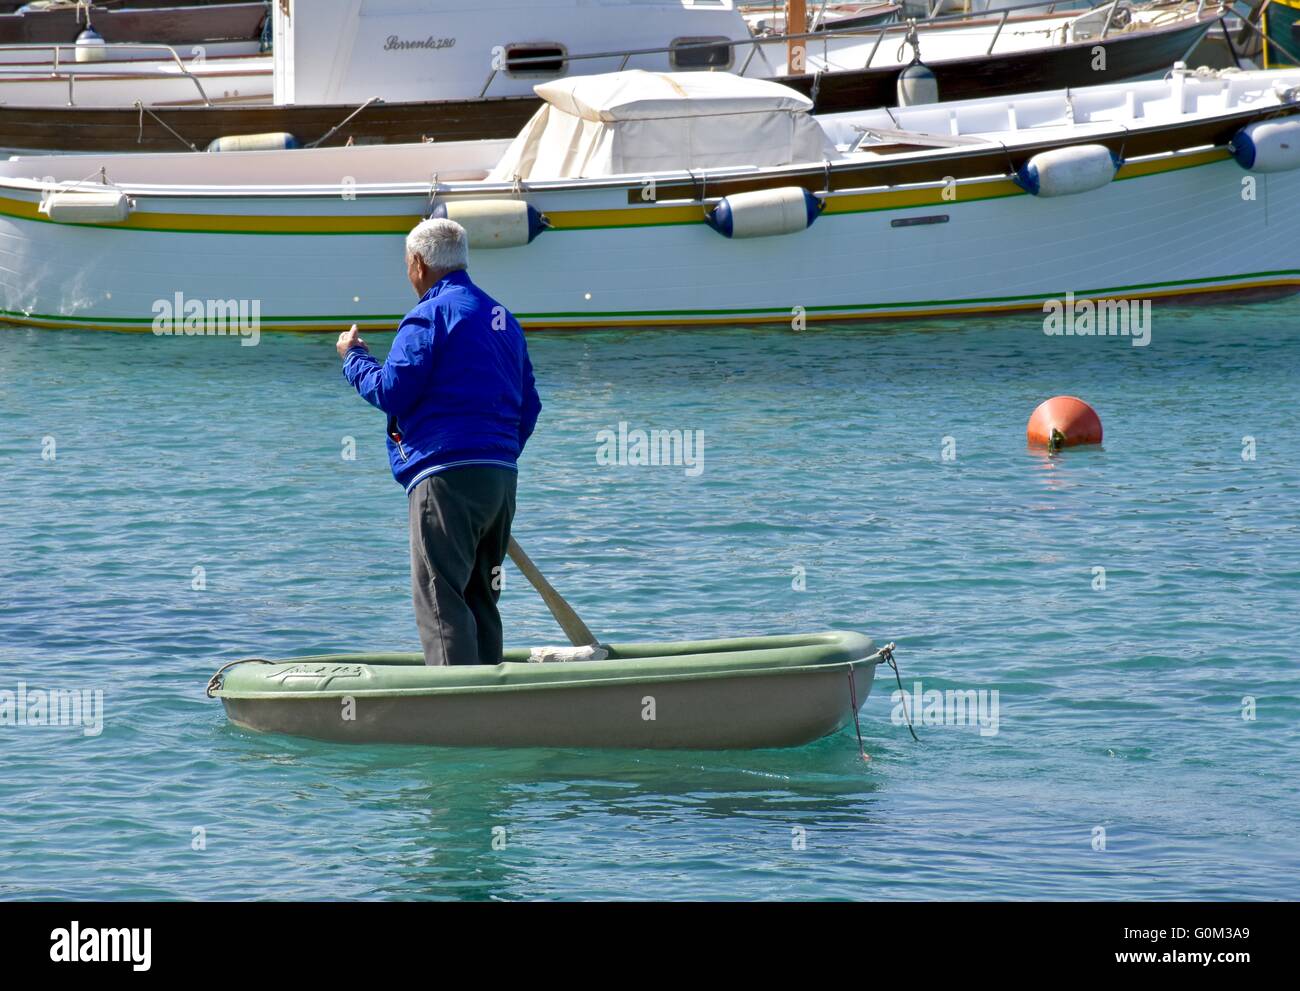 A man rowing a small boat across the bay to get his large boat Stock Photo